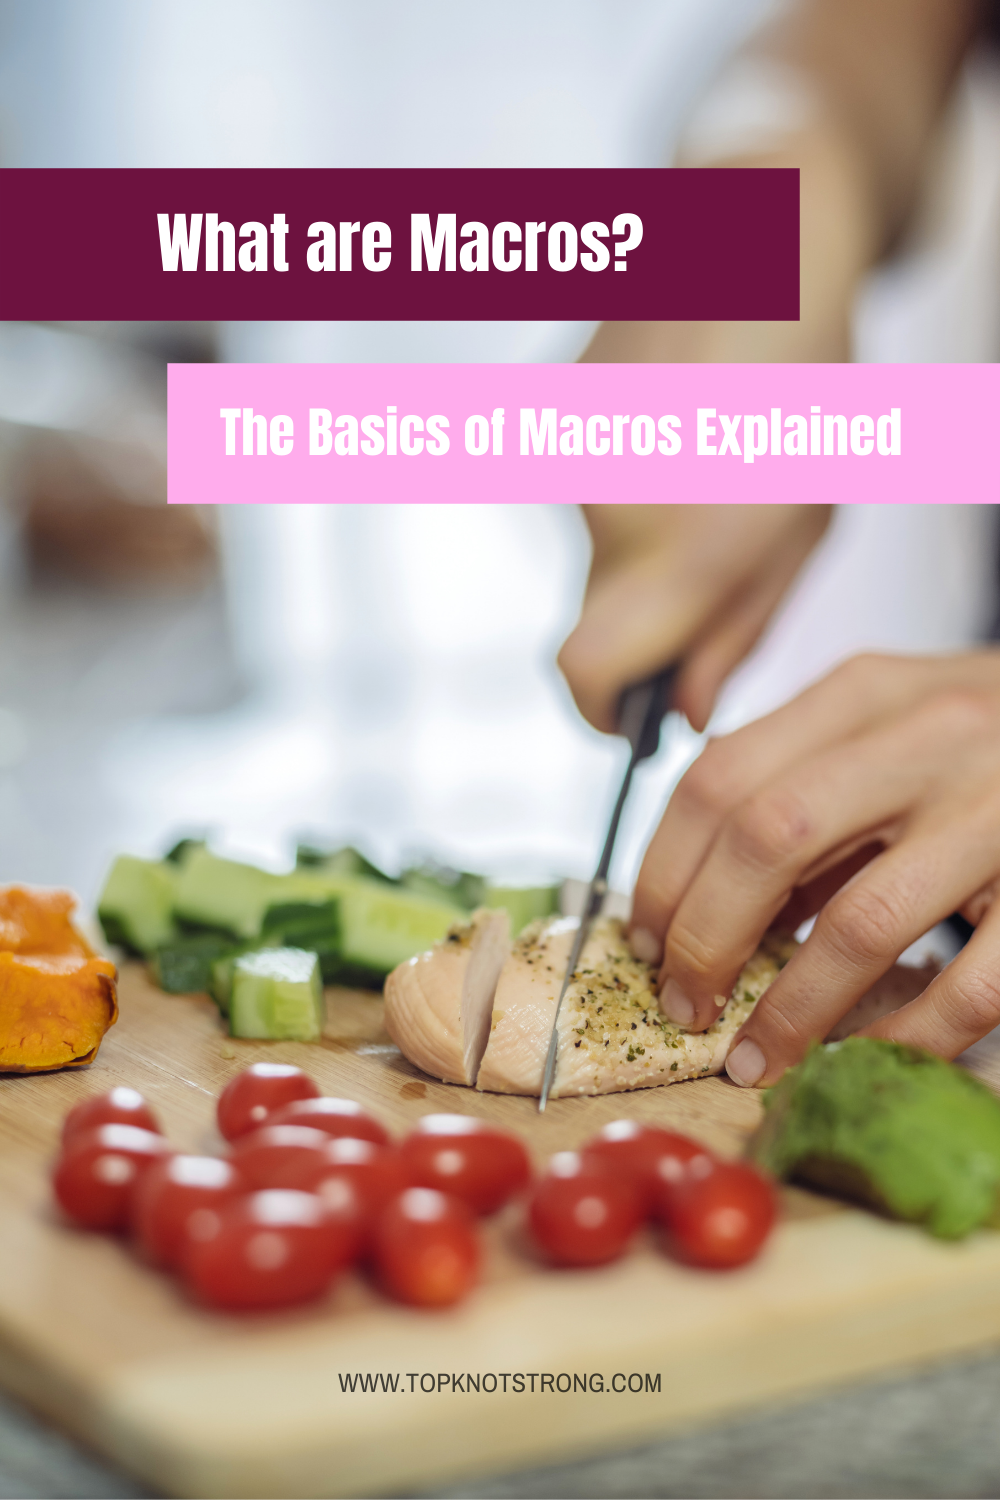 What are Macros? The Basics of Macros Explained